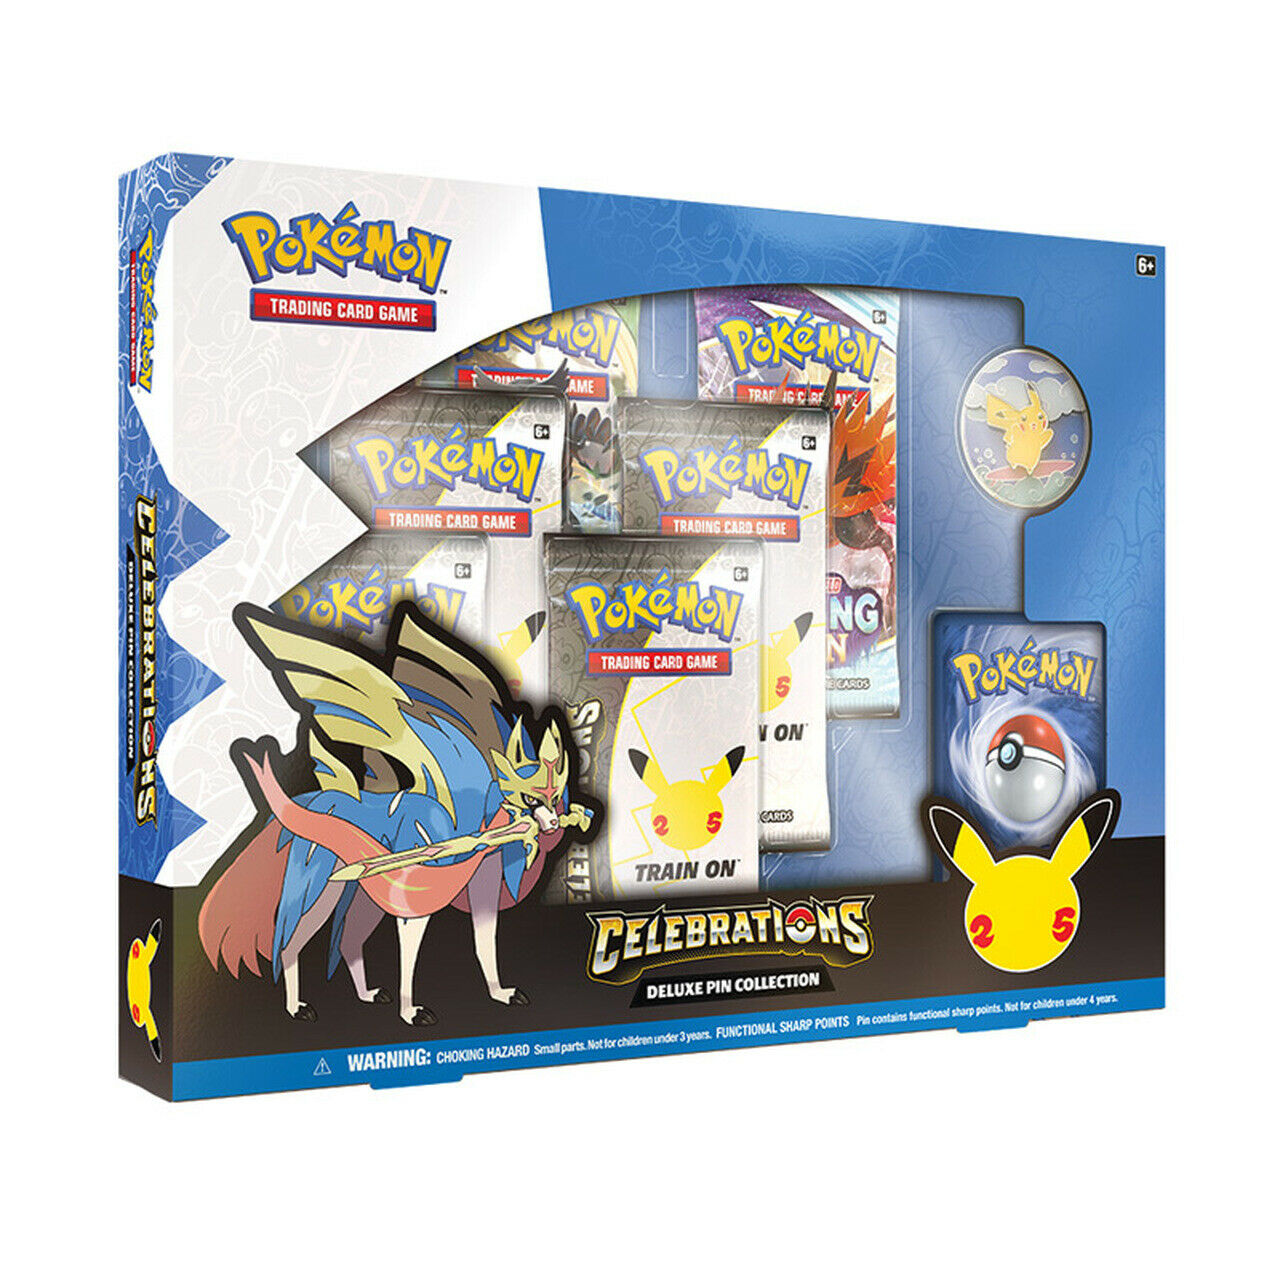 Pokémon TCG: Celebrations Deluxe Pin Collection | RetroPlay Games